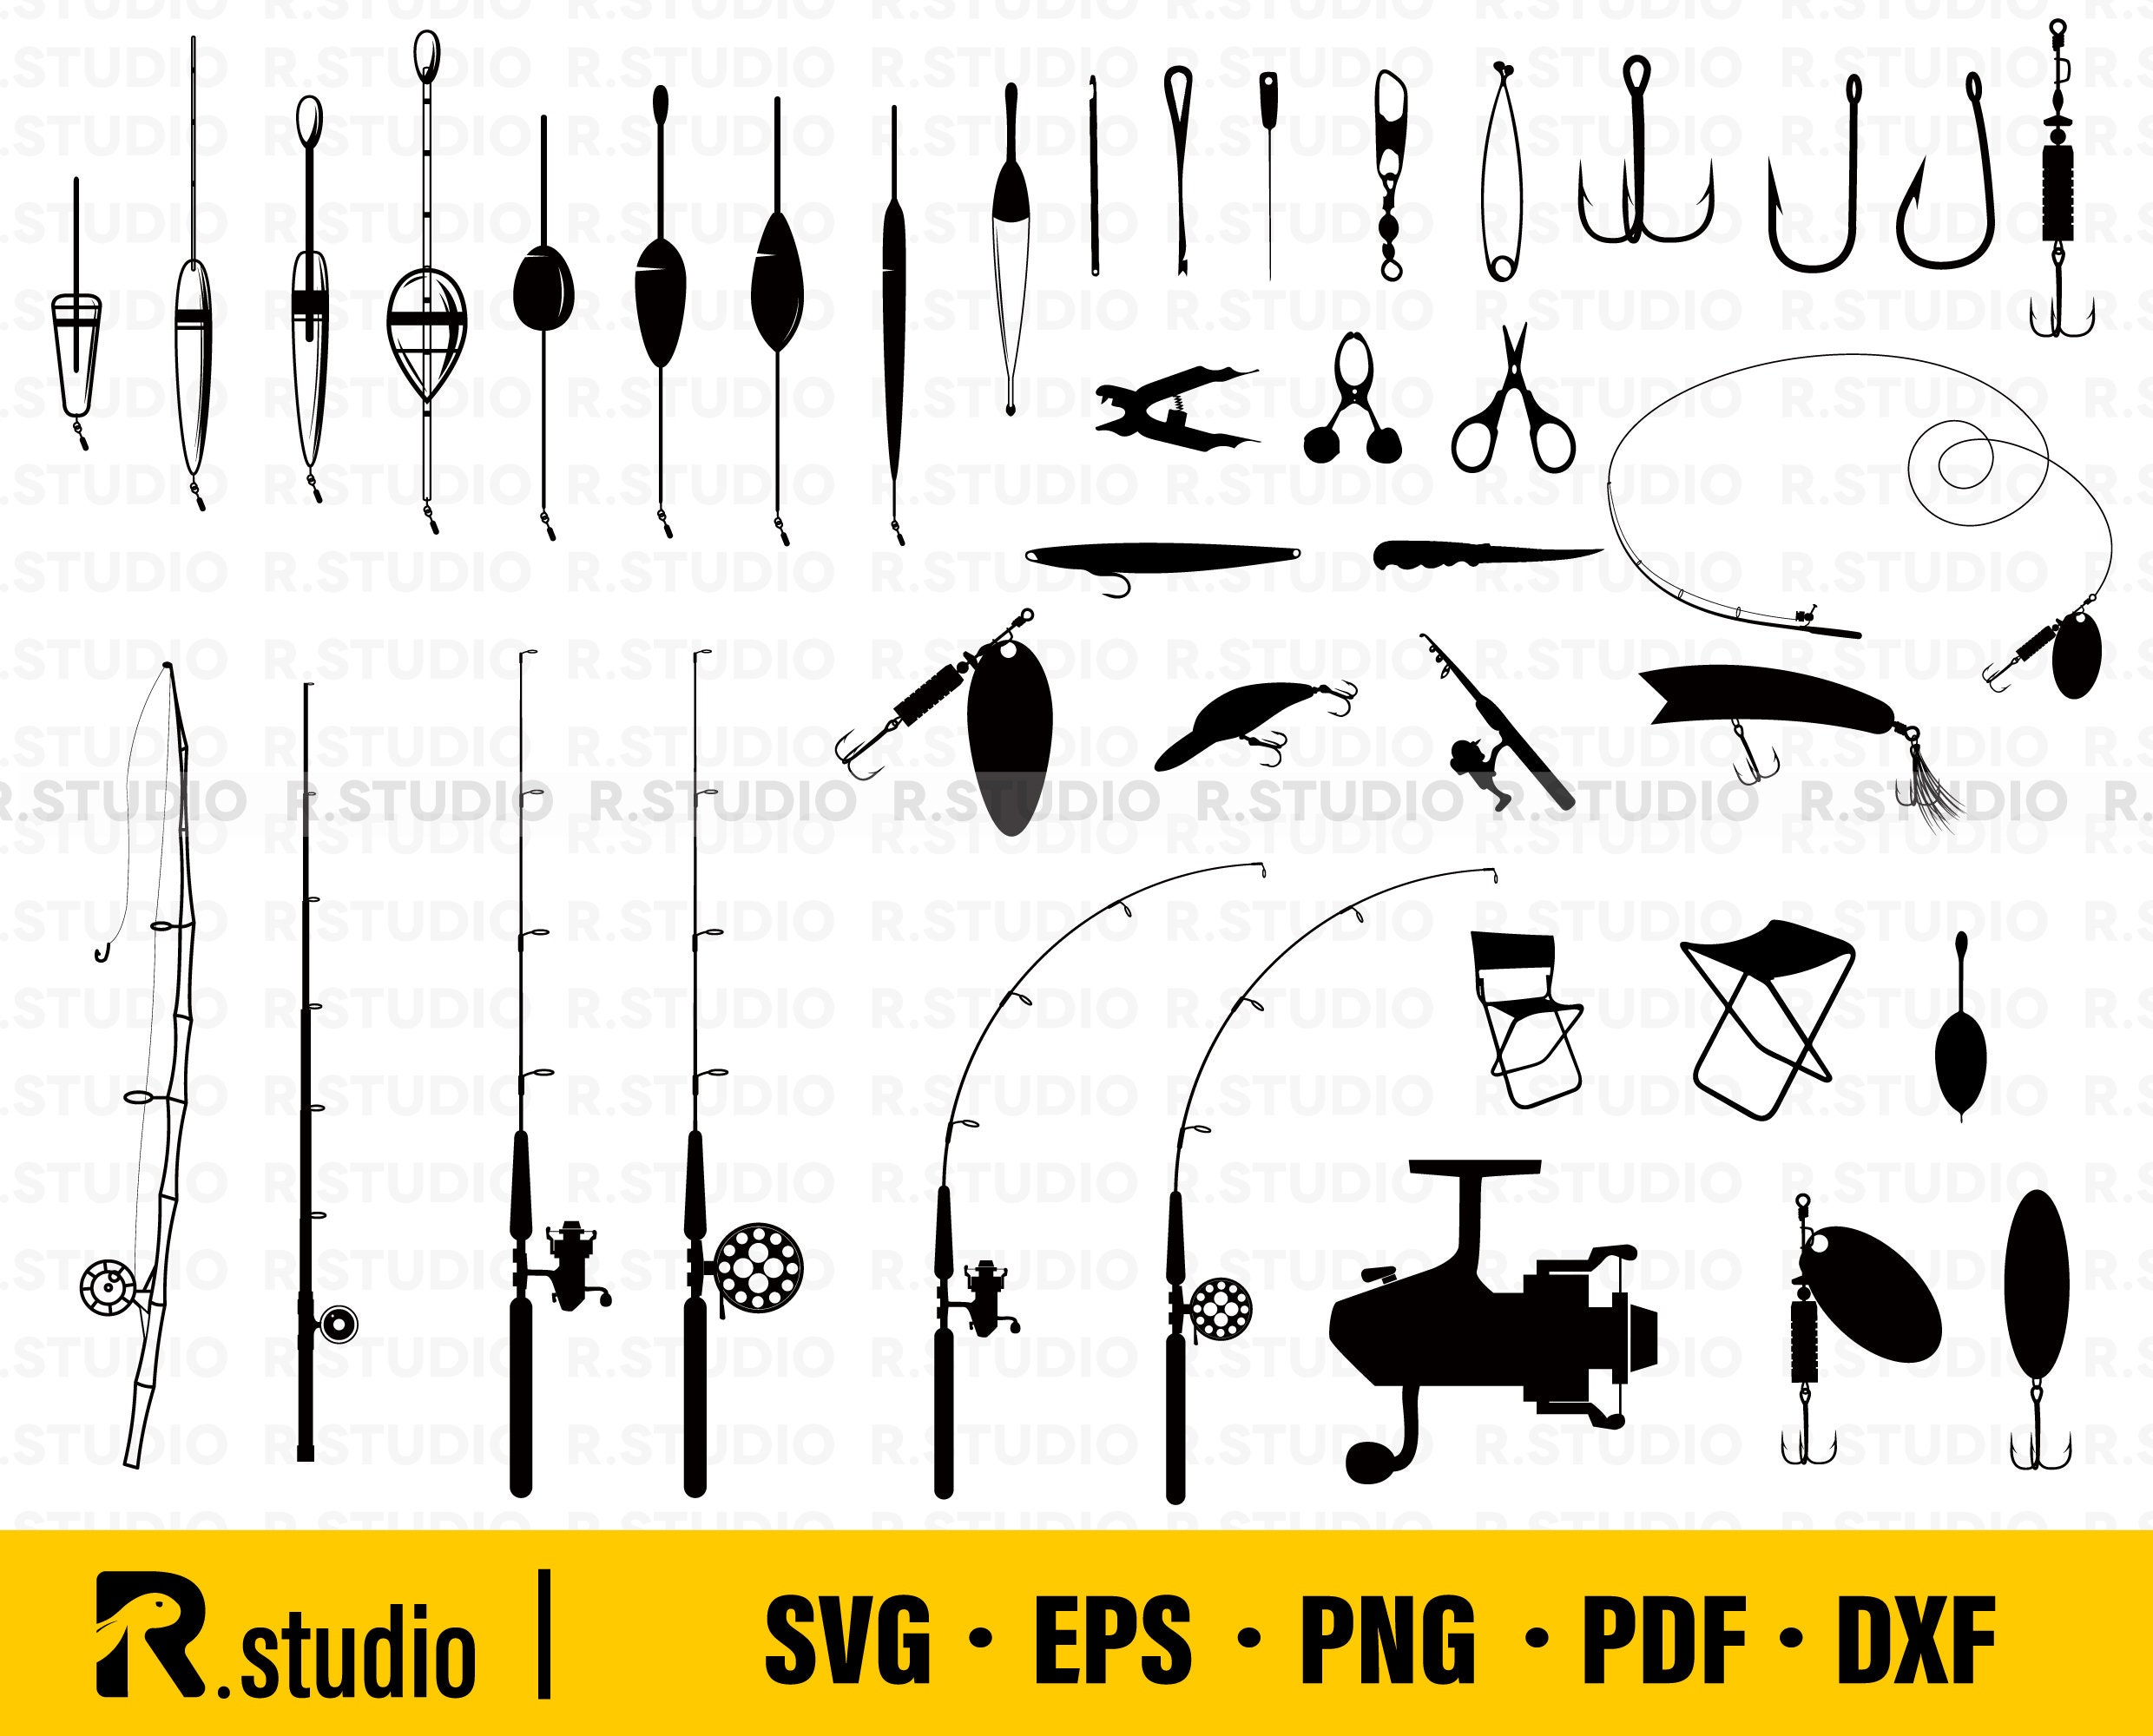 40 Fishing Gear SVG/ Fishing Tools SVG/ Cut File/ Cricut/ Clipart/  Silhouette/ Vector/ Fishing Tackle SVG/ Vector/ Summer Svg/ Fish Svg Dxf 